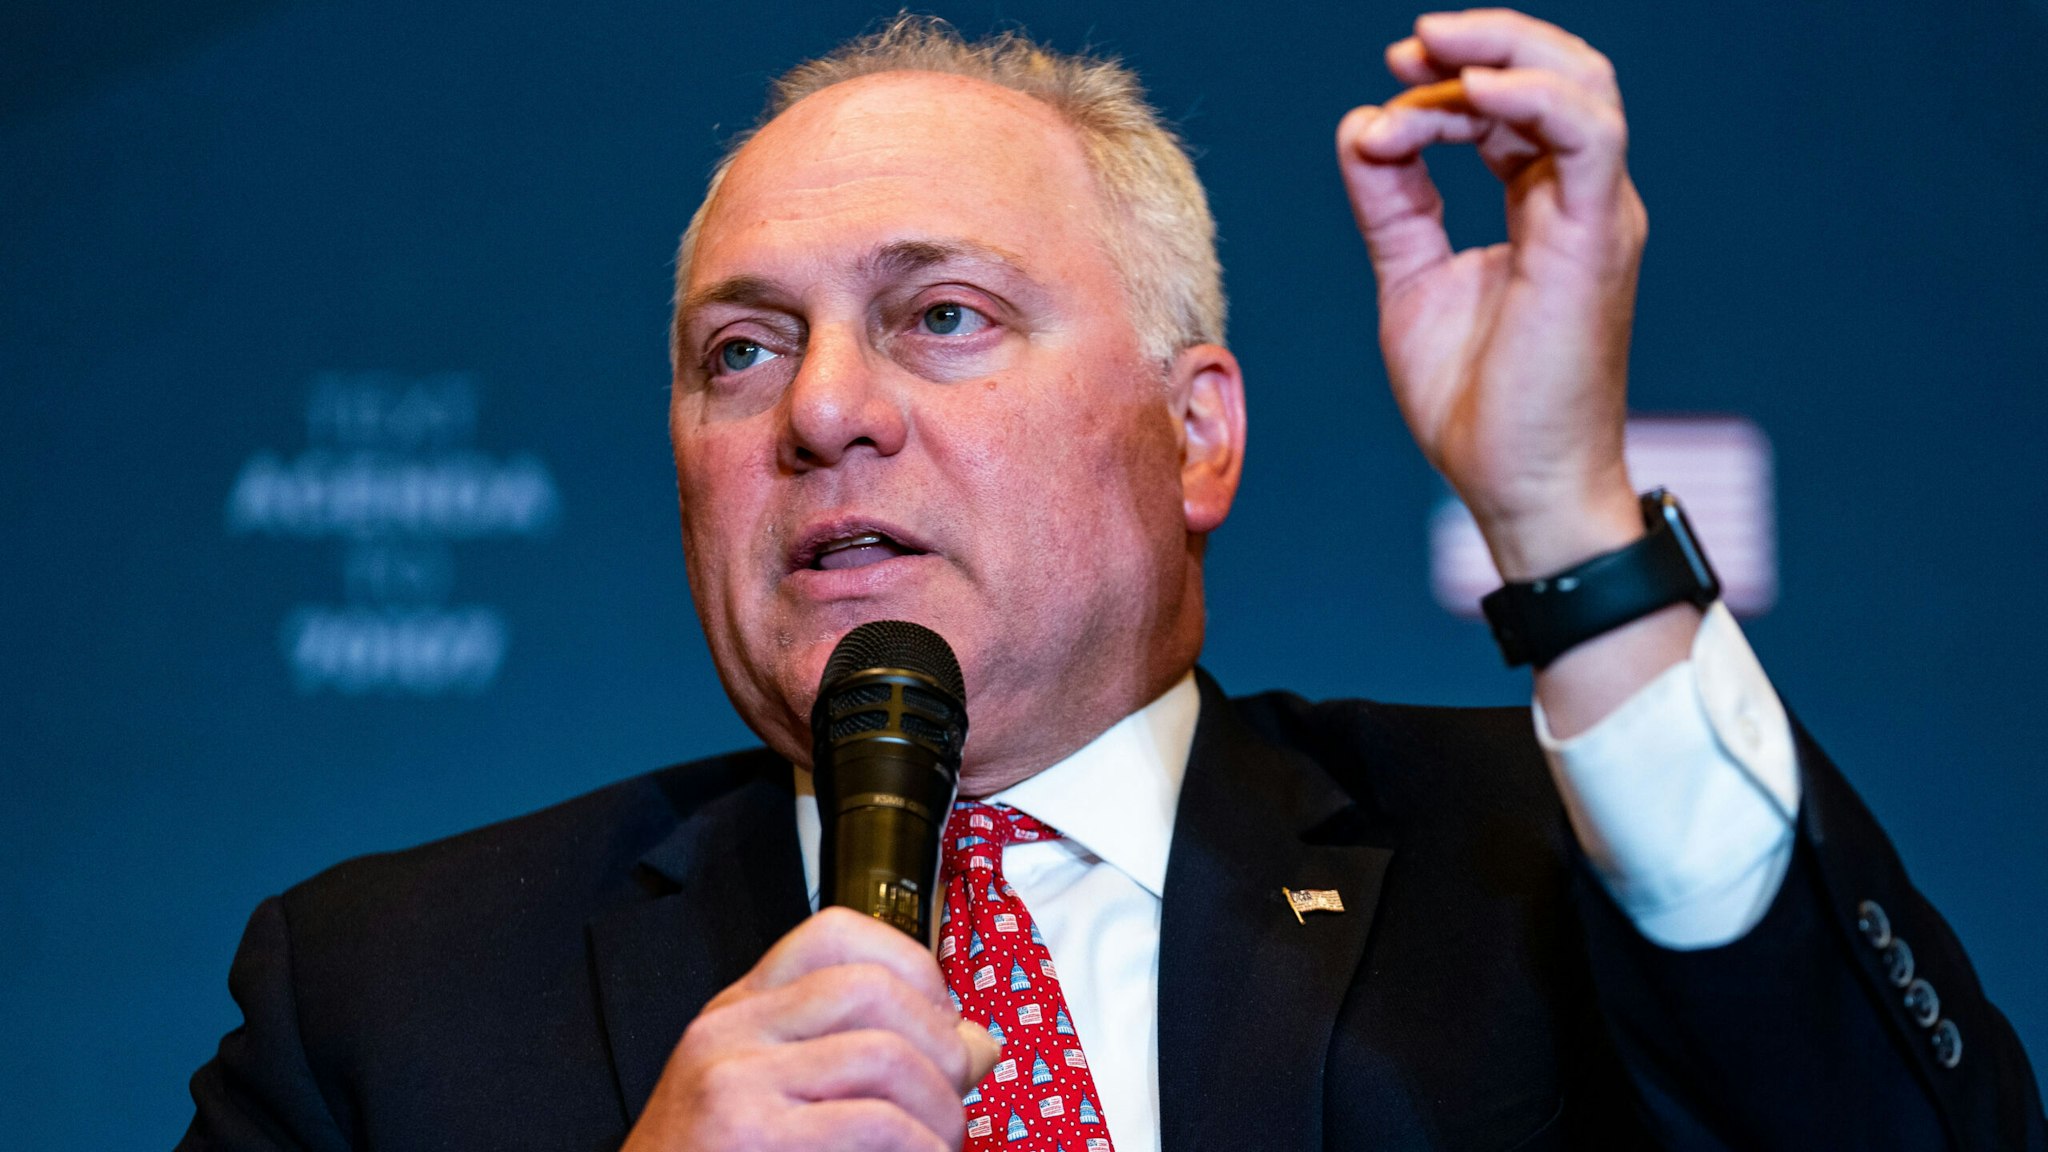 WASHINGTON, DC - JULY 26: House Minority Whip Steve Scalise (R-LA) gestures while speaking during a panel at the America First Policy Institute's America First Agenda summit at the Marriott Marquis on Tuesday, July 26, 2022 in Washington, DC.The non-profit think tank was formed last year by former cabinet members and top officials in the Trump administration to create platforms based on his policies.